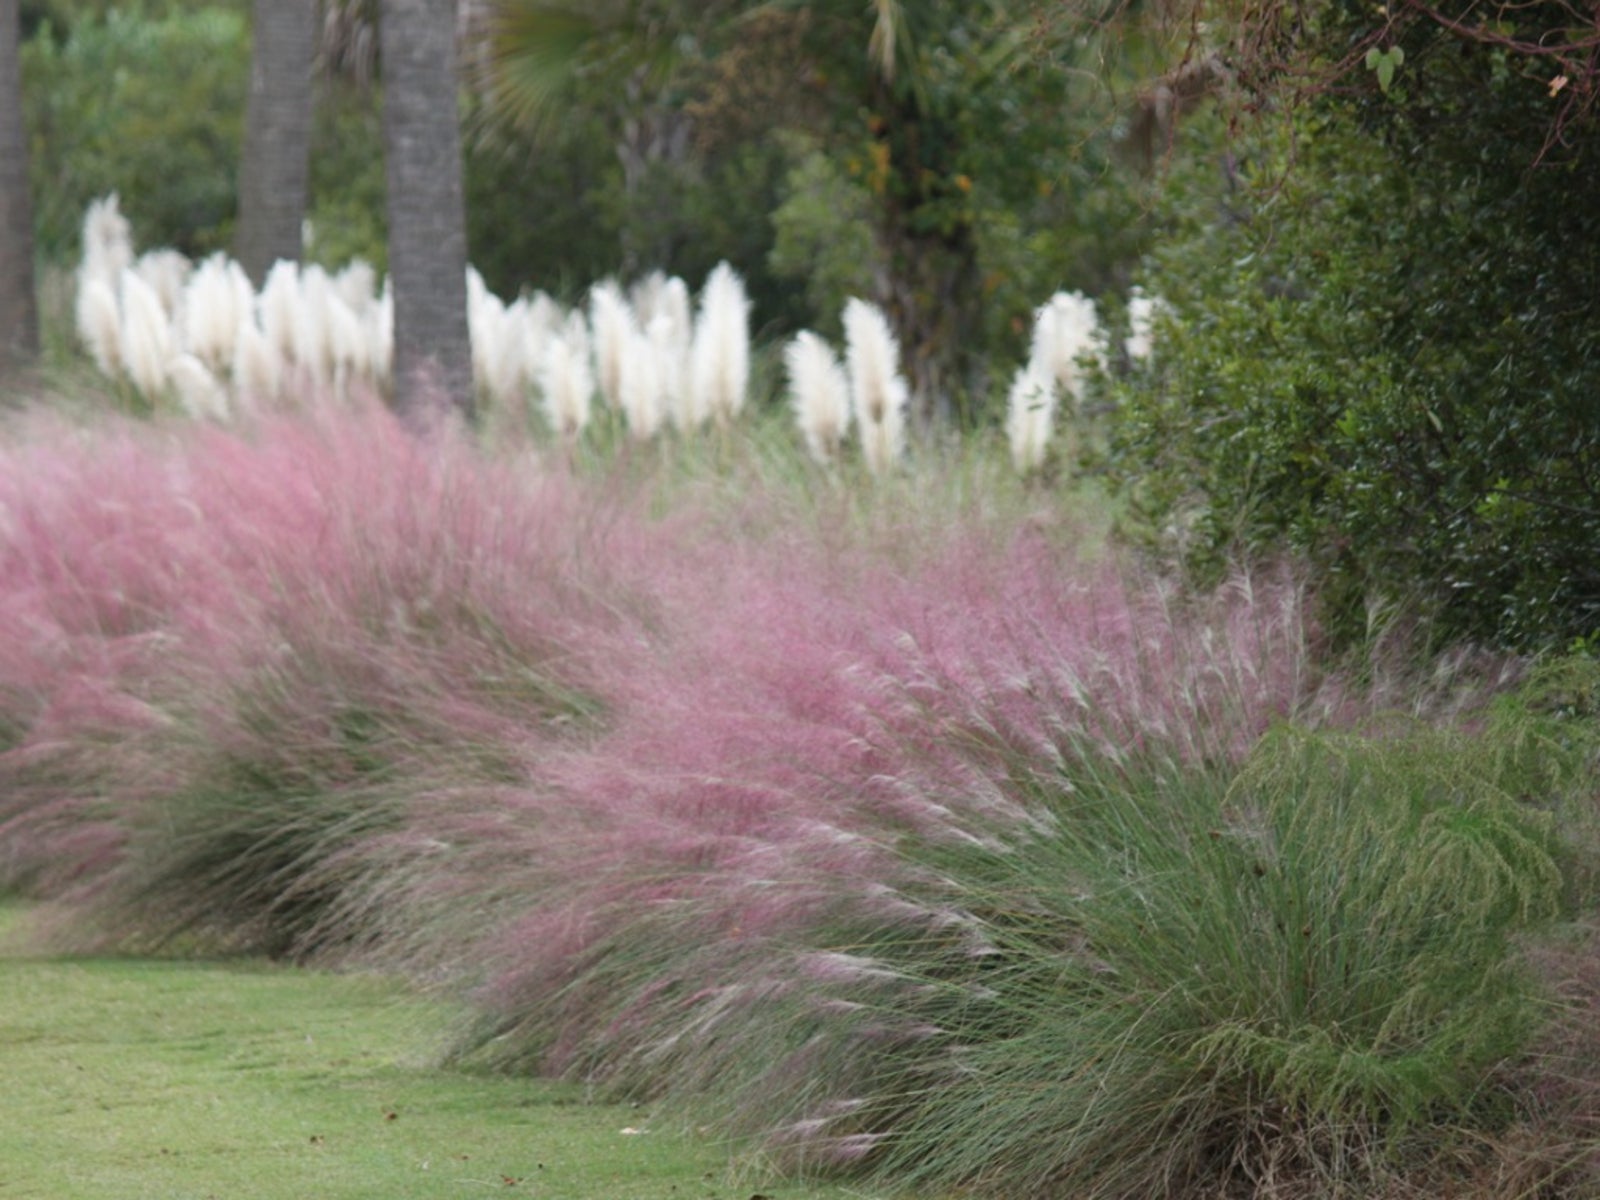 Growing Ornamental Grasses Learn More, Landscaping With Ornamental Grasses Plans